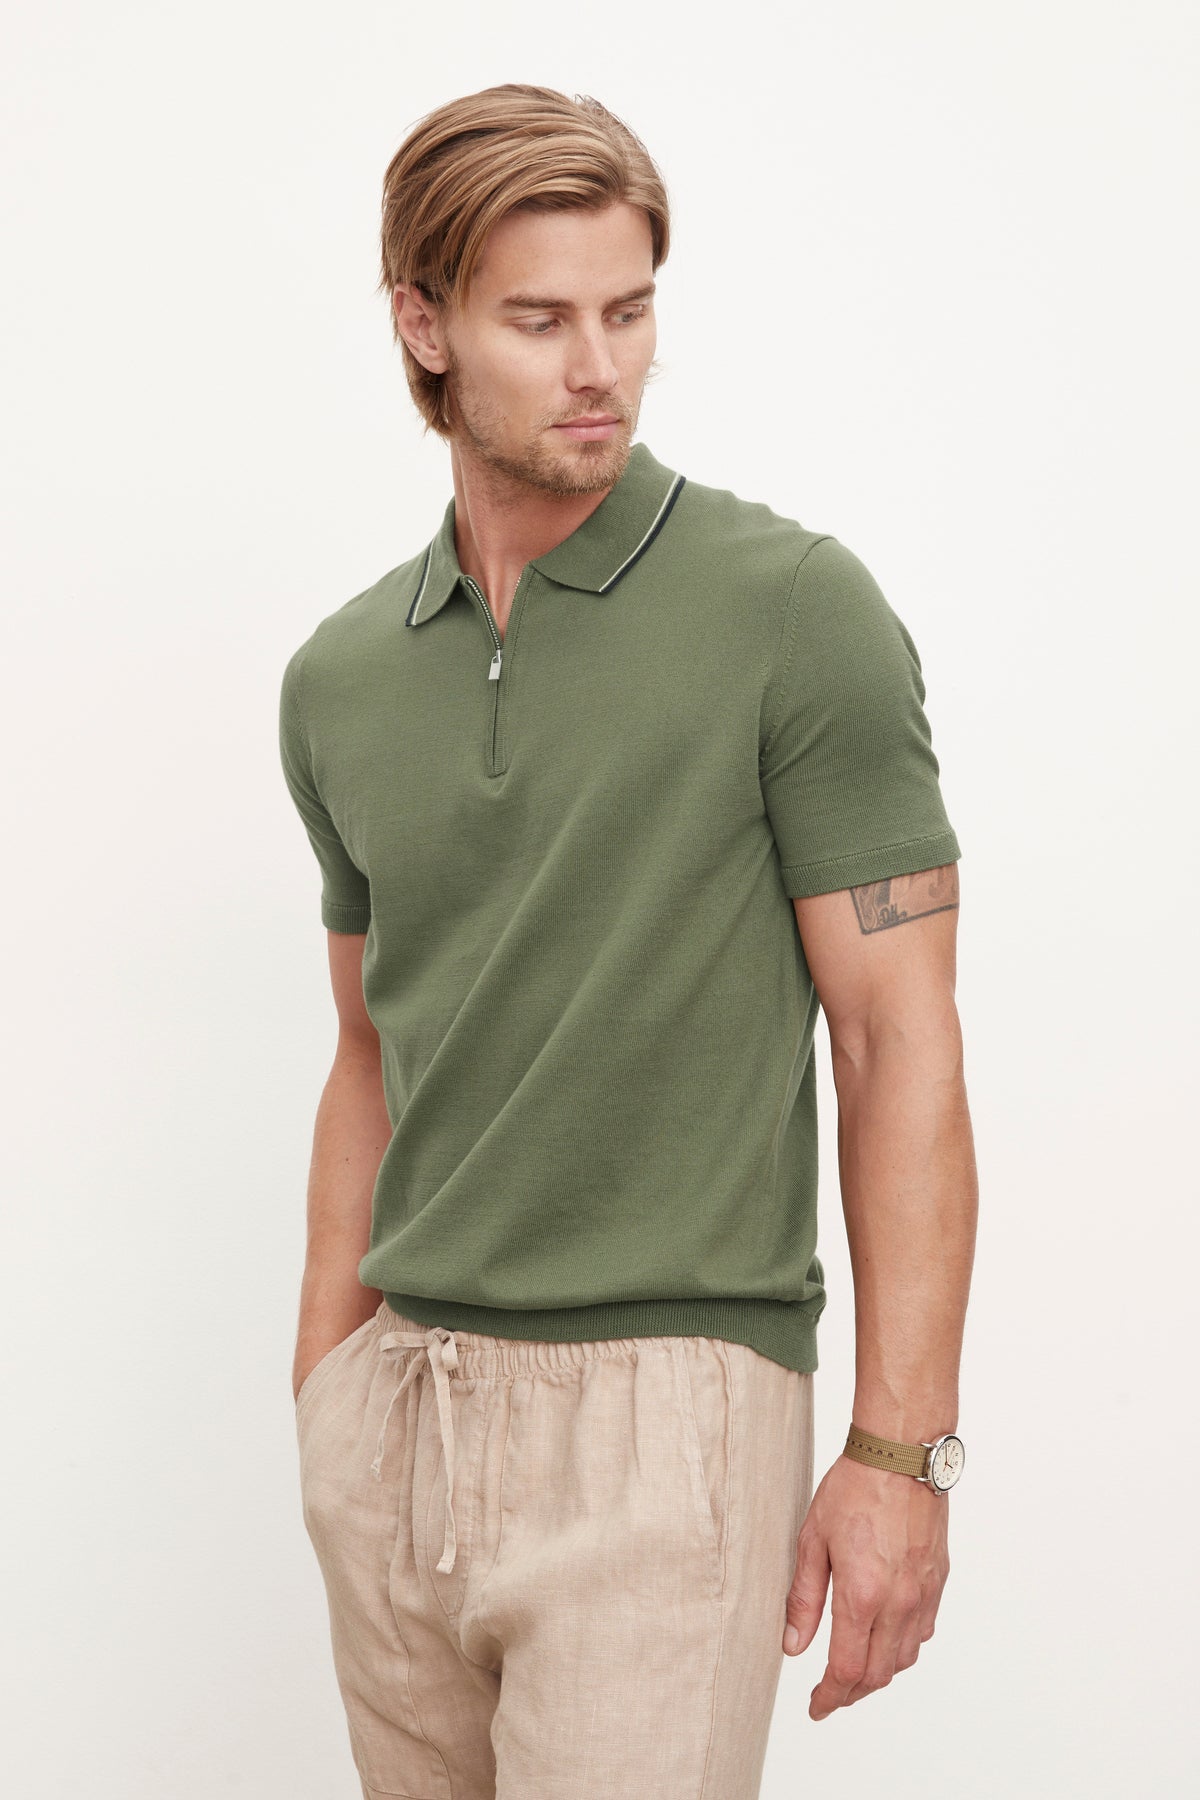 The model is wearing a green OTTO ZIP POLO shirt and tan pants.-36009964142785